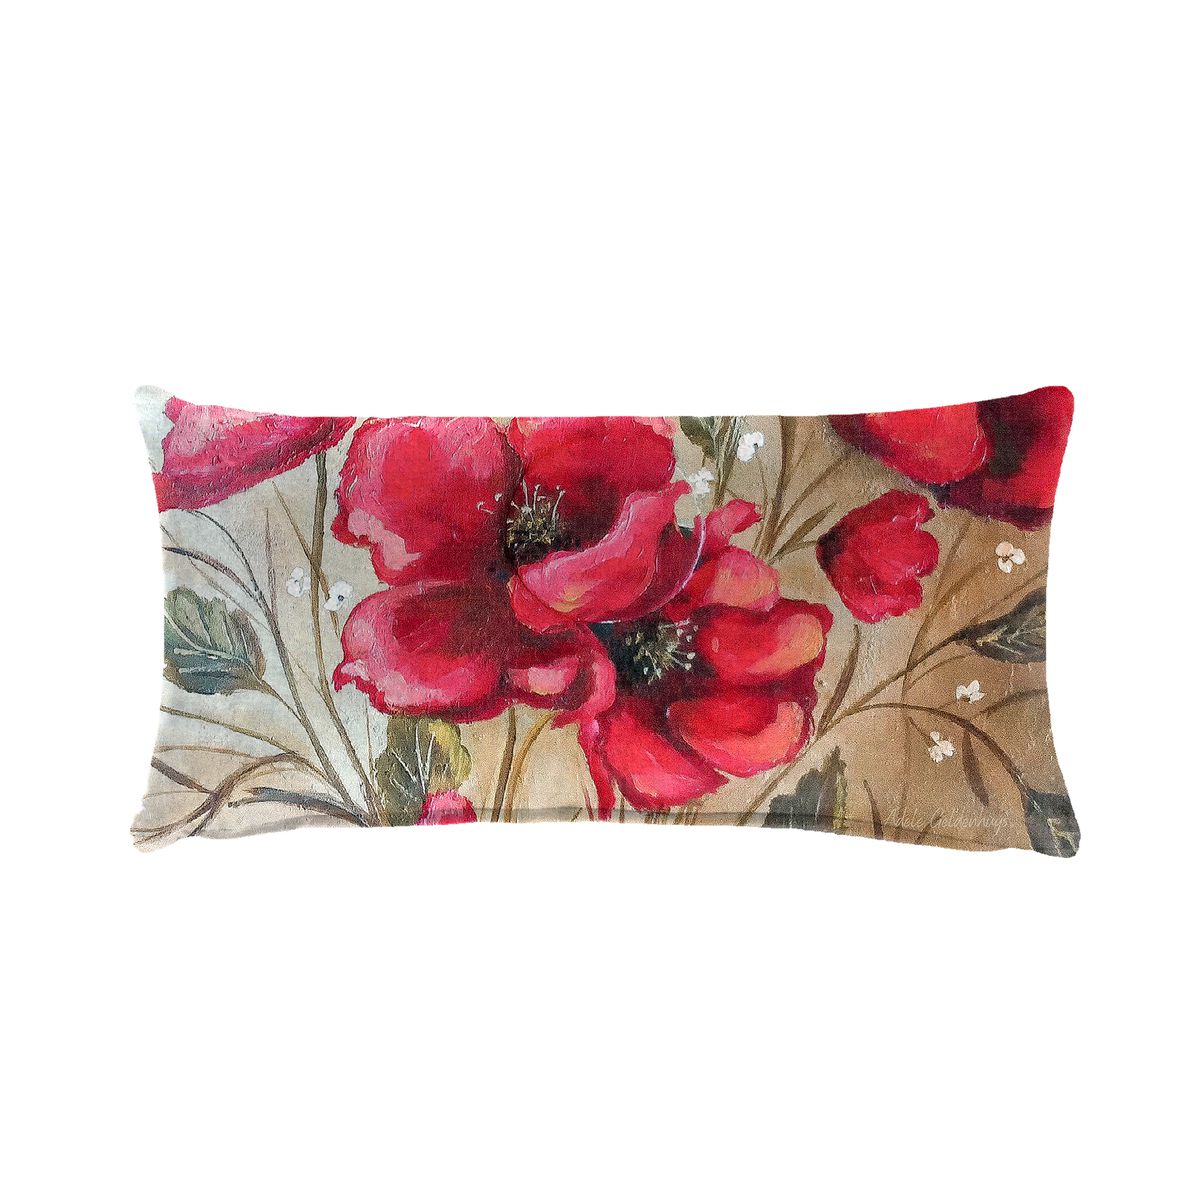 Poppies By Adele Geldenhuys Oblong Luxury Scatter